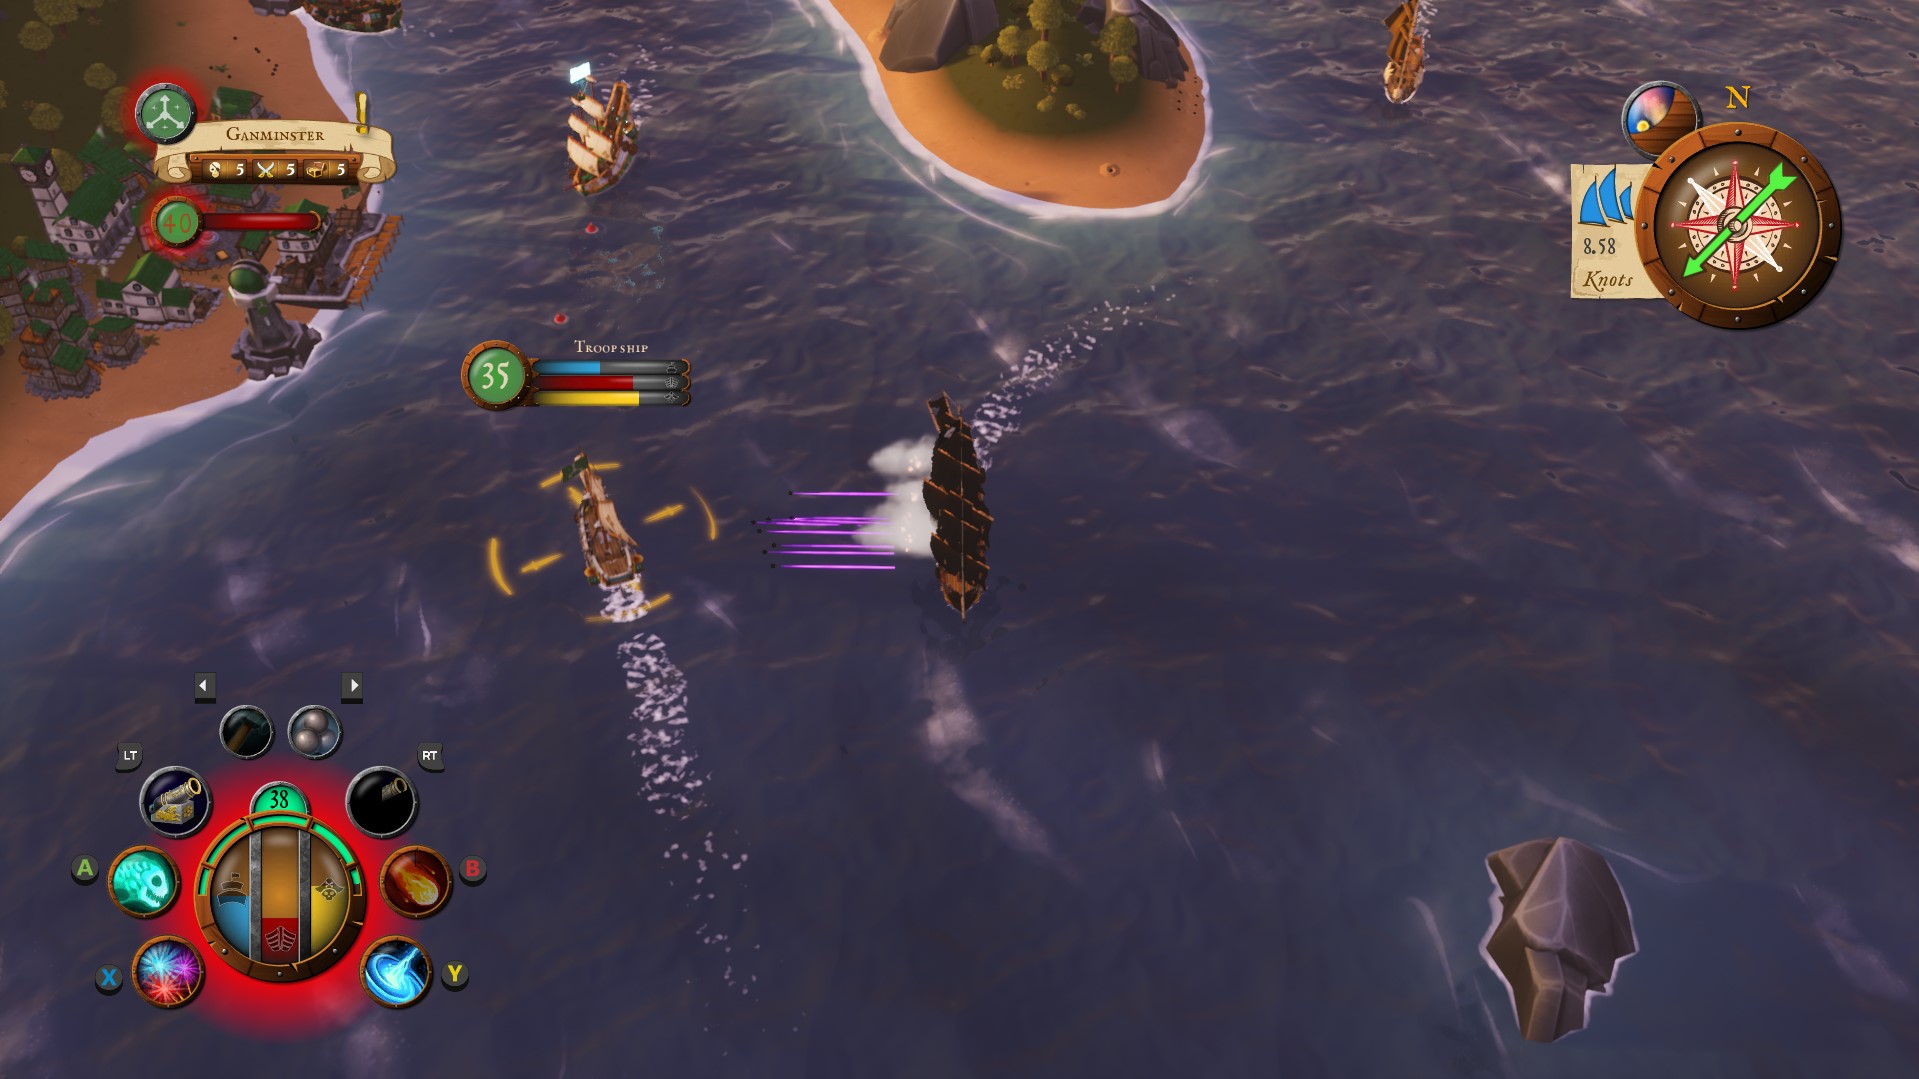 king_of_seas_splash Being a Single-Player Adventure, King of Seas Rewards You For Becoming a Greedy, Bellicose Pirate